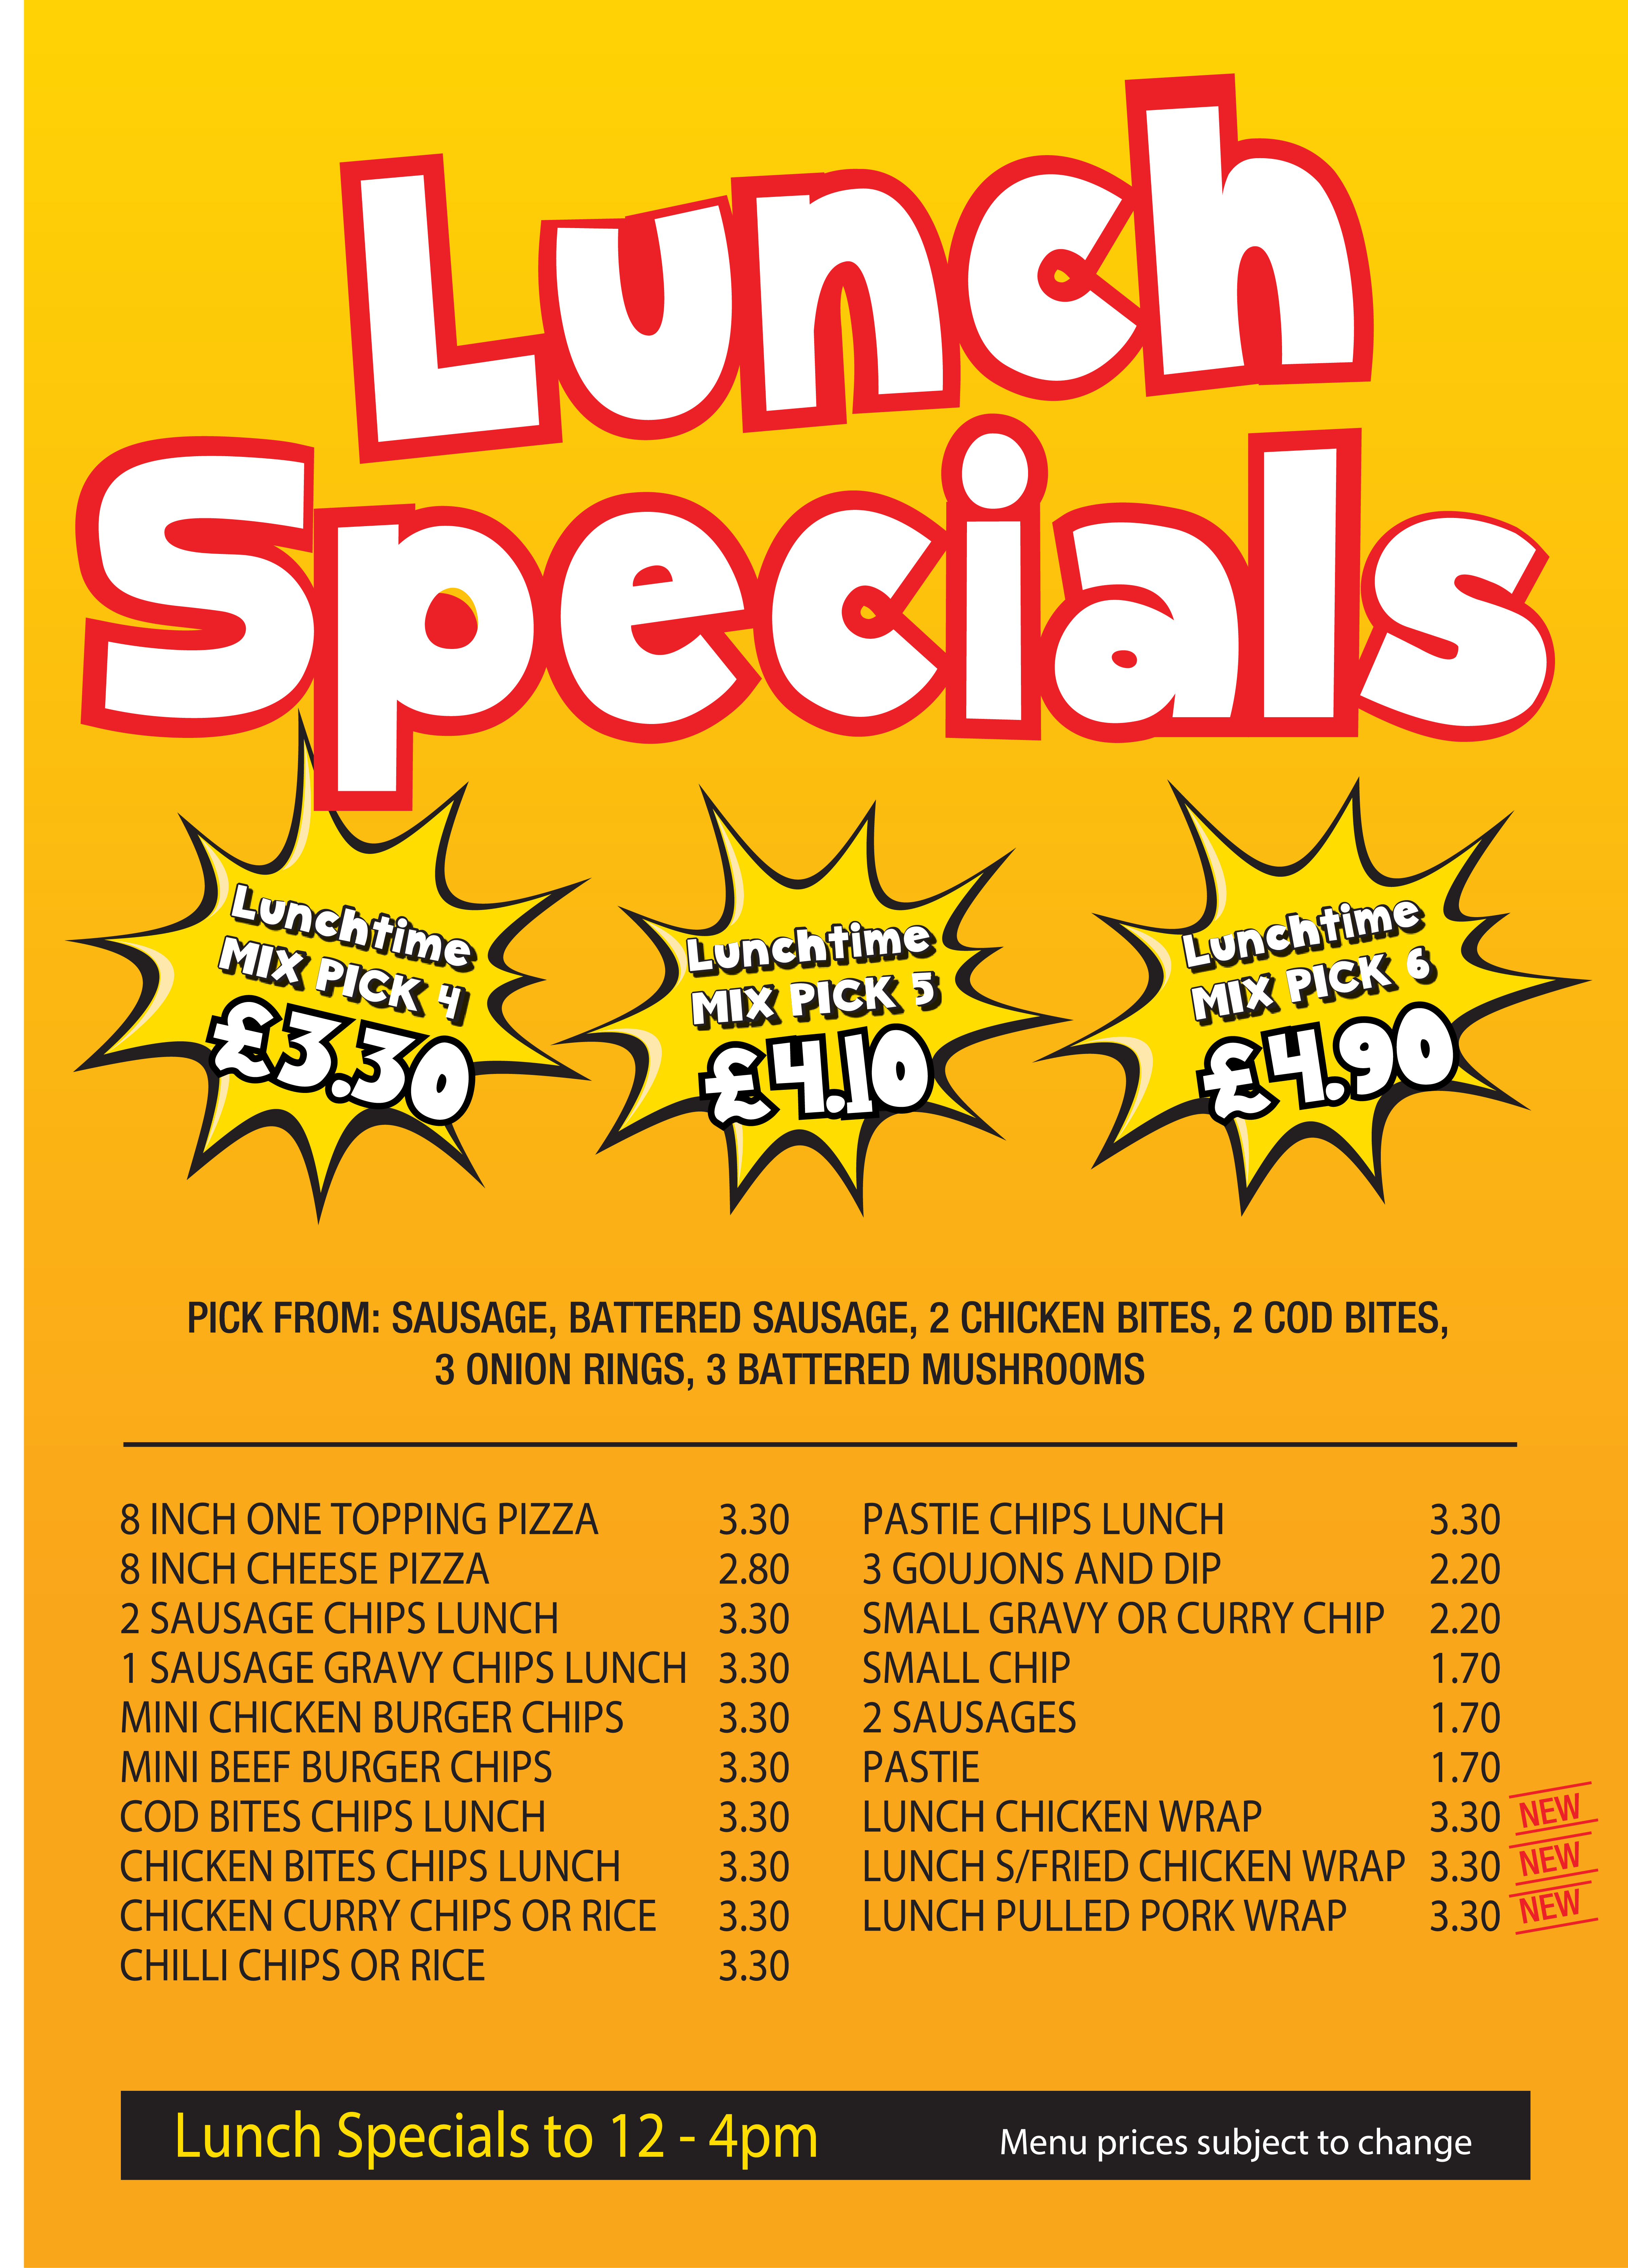 Lunchtime Specials Menu